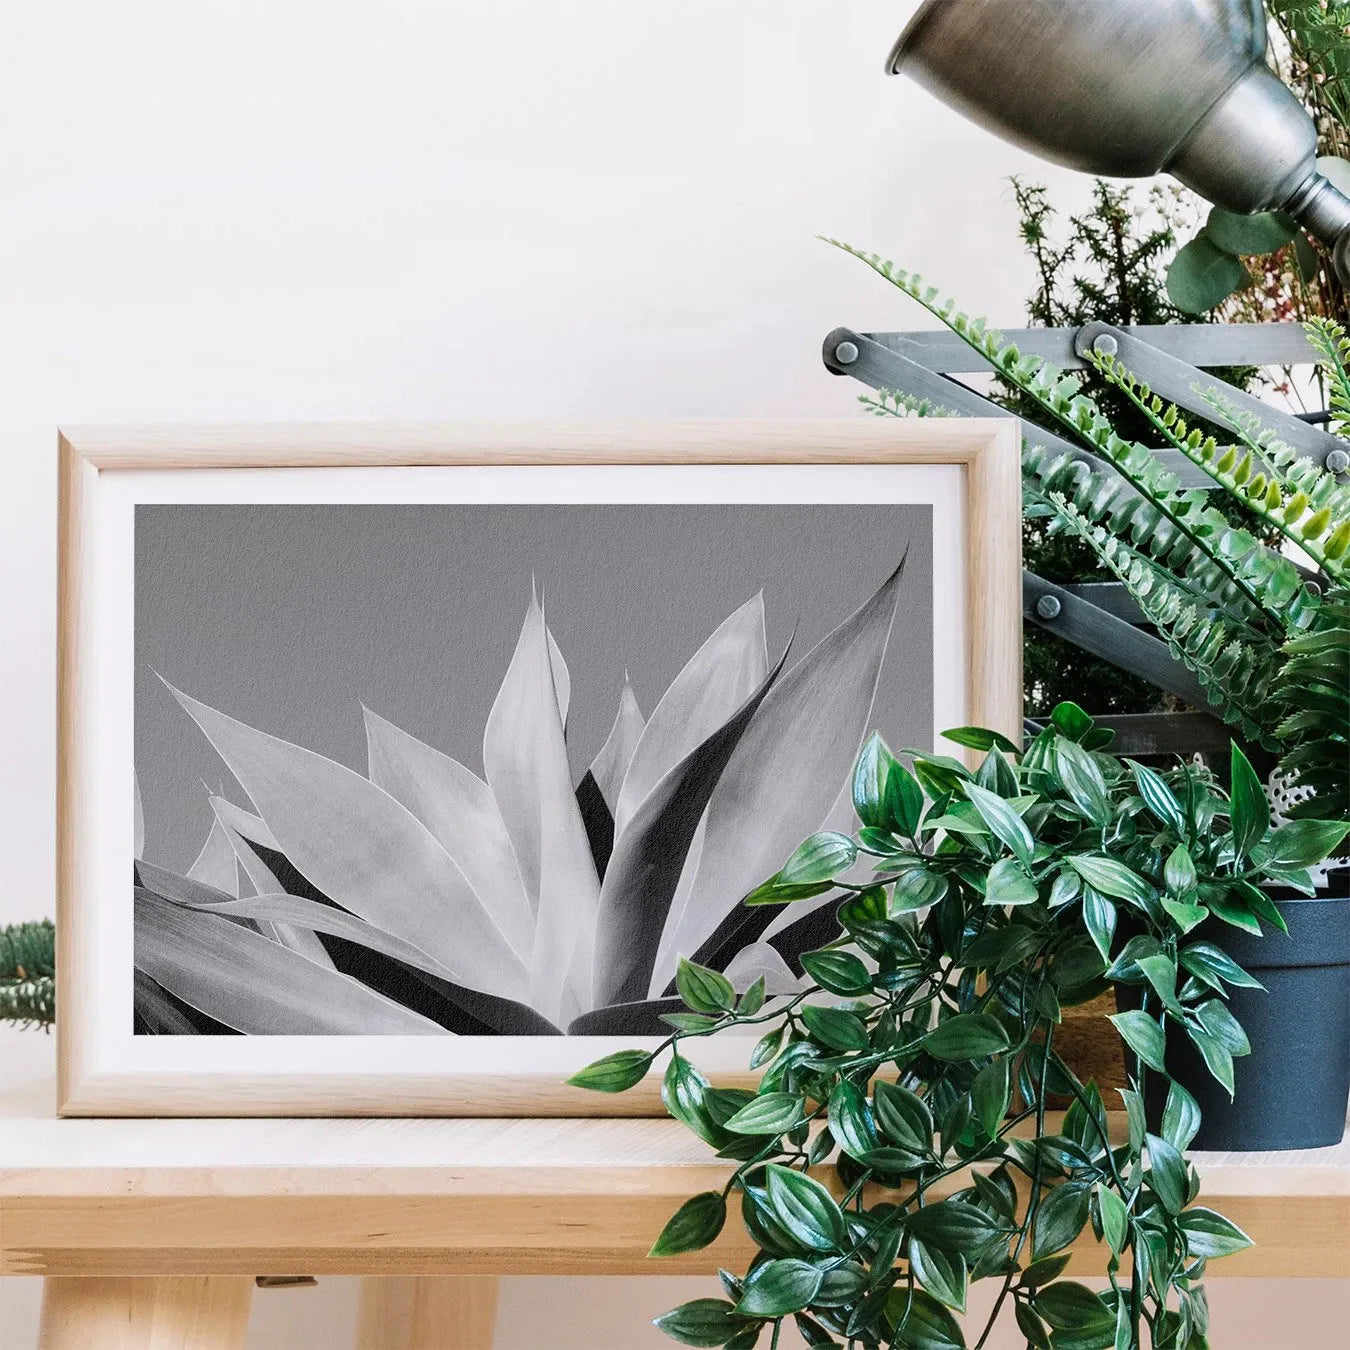 In Bloom - Succulent Black And White Wall Art - Posters Prints & Visual Artwork - Aesthetic Art